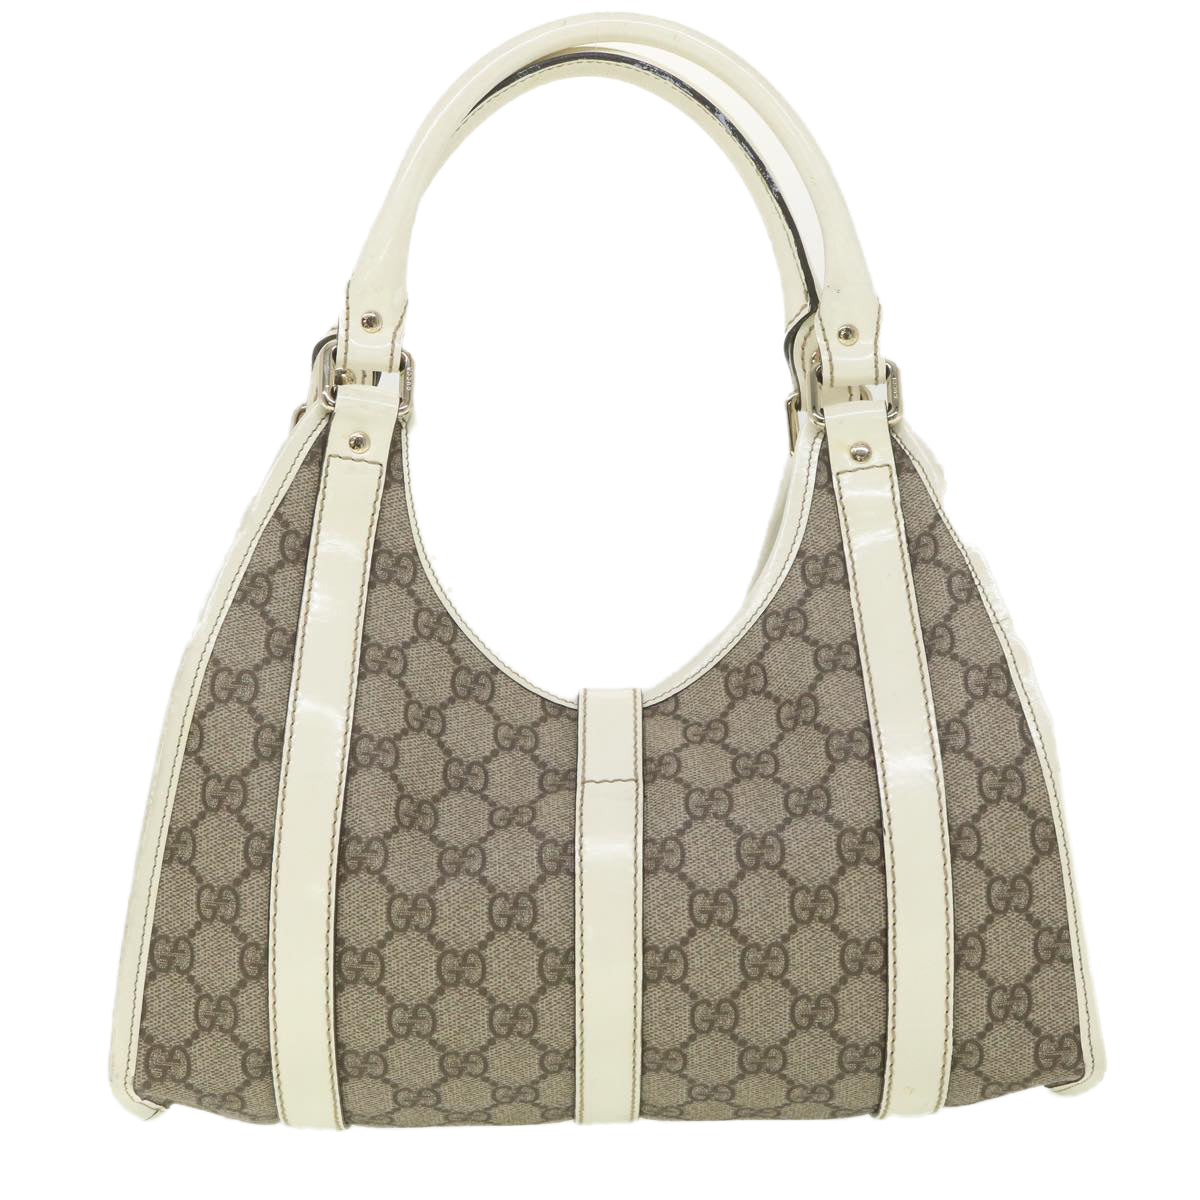 GUCCI GG Supreme Hand Bag PVC Leather Beige 203495 Auth 38280 - 0